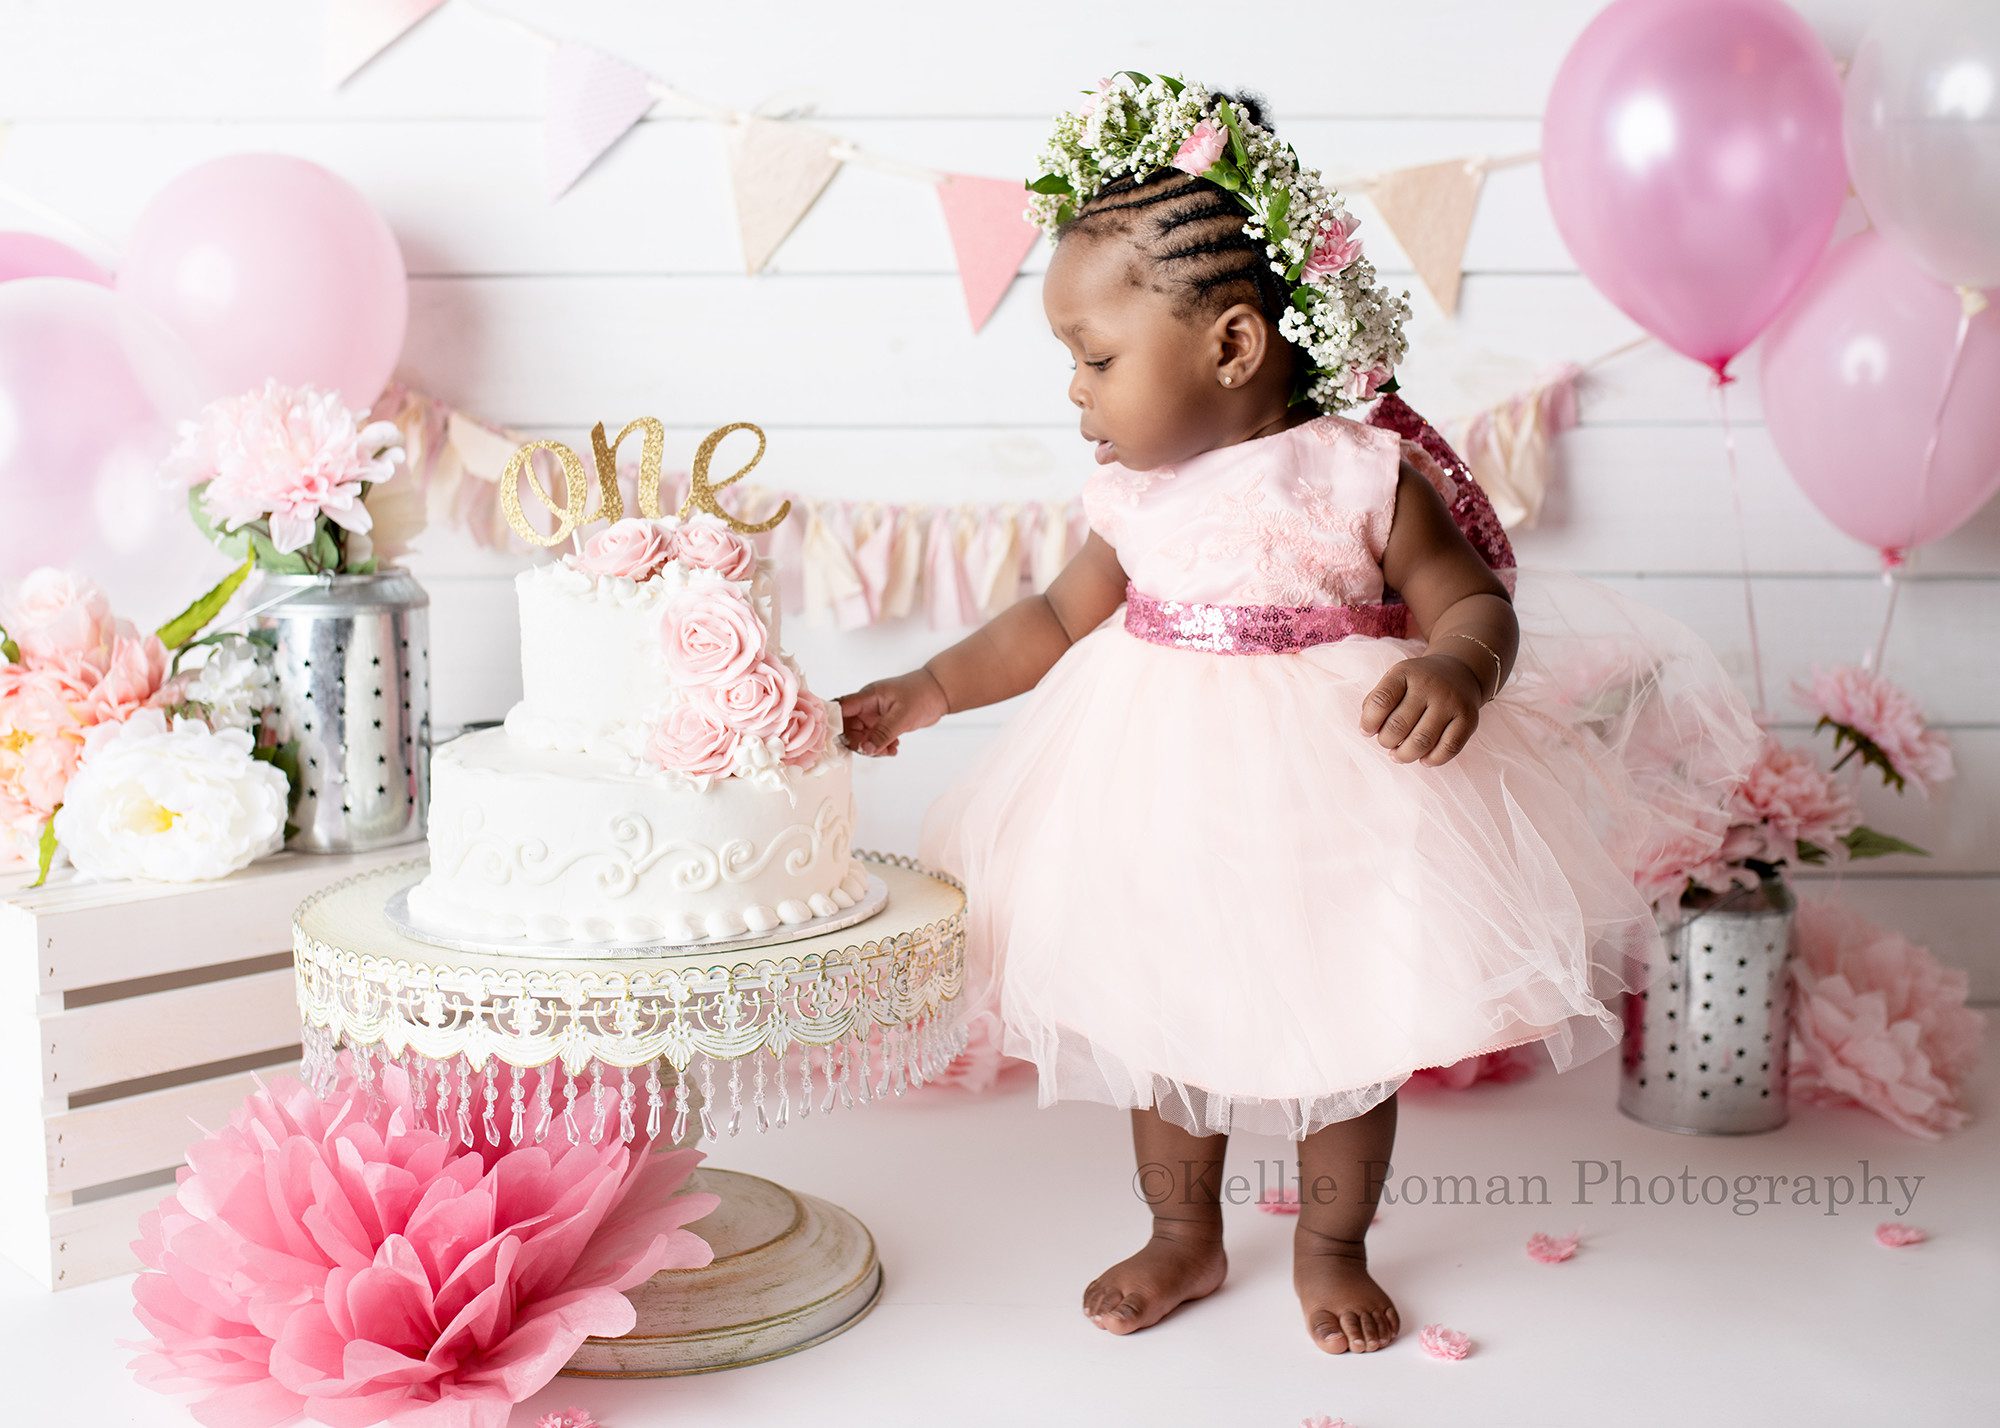 takes the cake a one year old girl is in a milwaukee photographers studio for her cake smash session she has a two tier white cake with pink flowers on a white cake stand with jewels she has to stand next to it it's so large. the girl has a pink dress on and the entire scene is filled with pink flowers and metal lanterns.